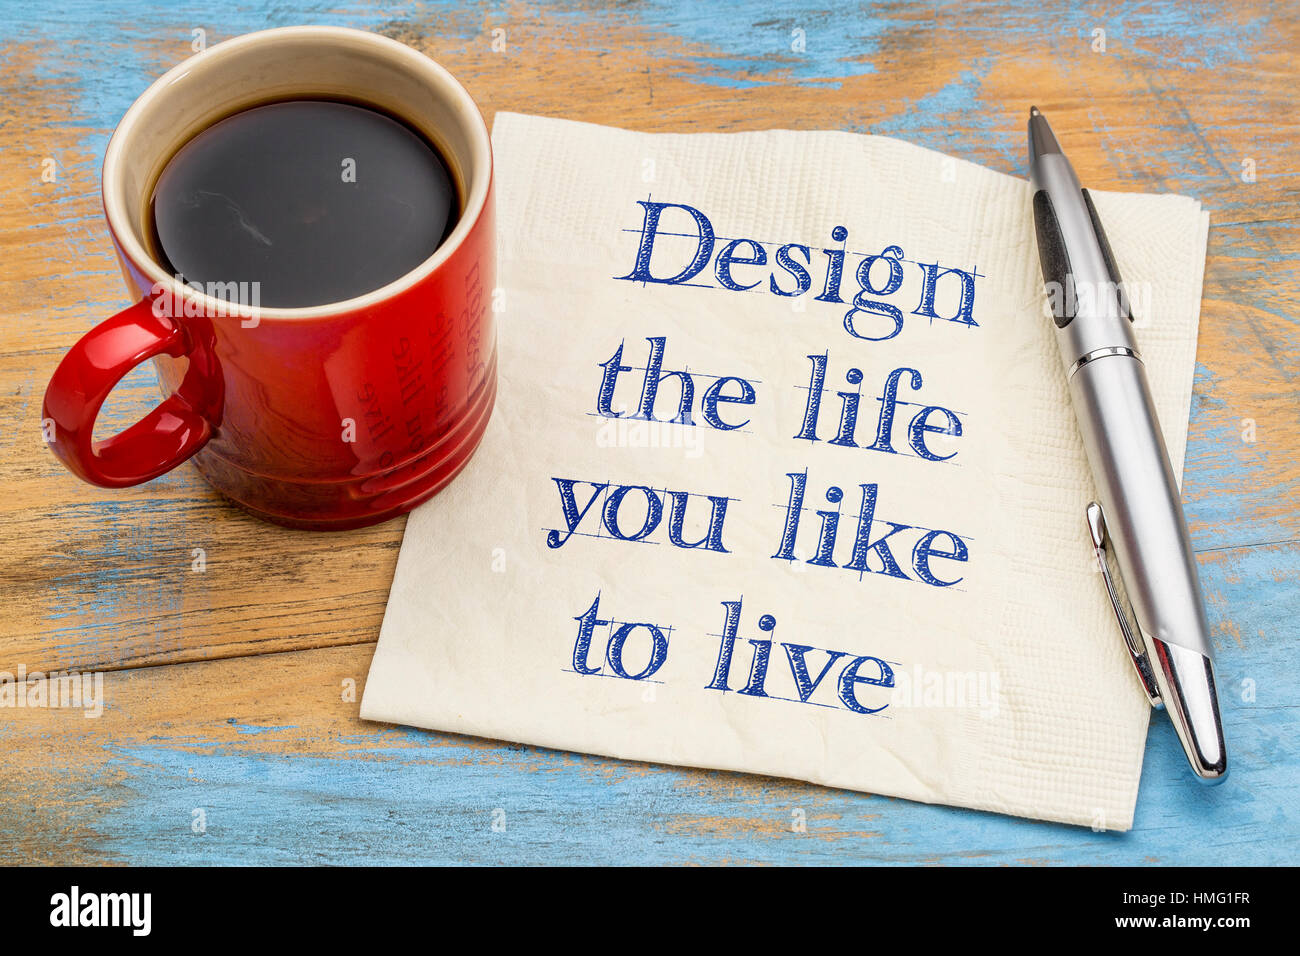 Design the life you like to live - handwriting on a napkin with a cup of coffee Stock Photo